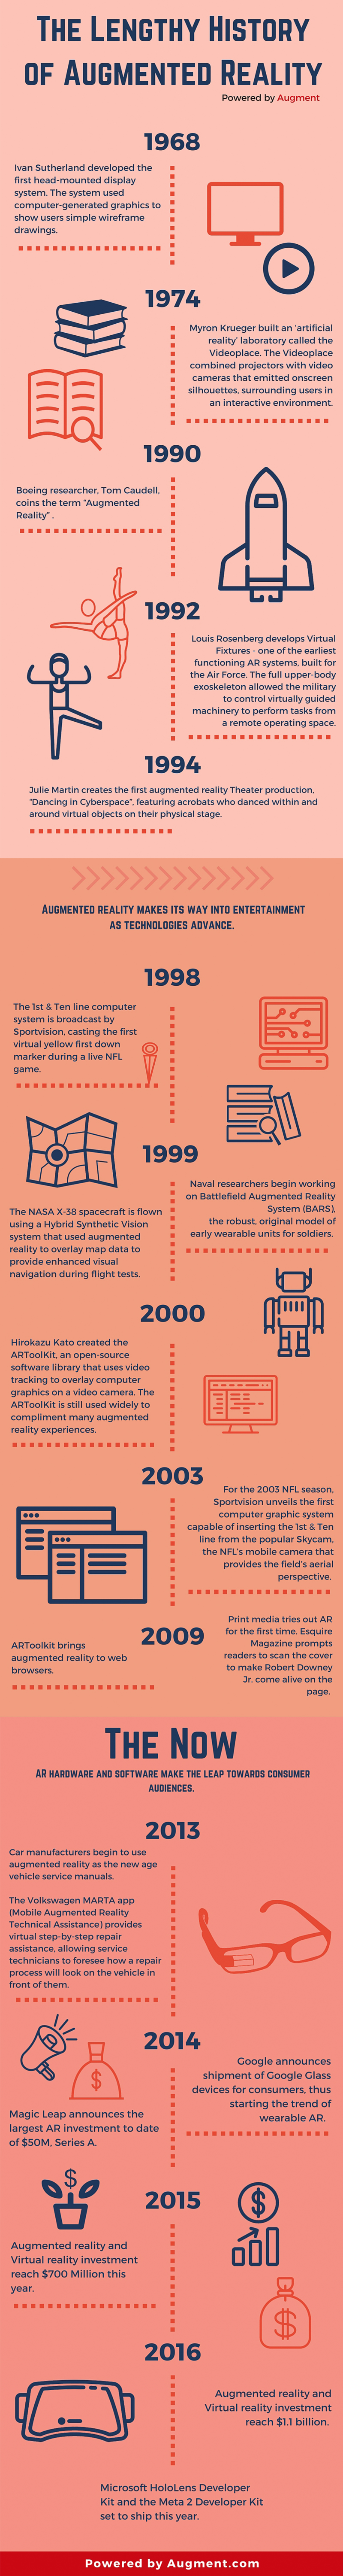 Infographic: The History of Augmented Reality - Augment News